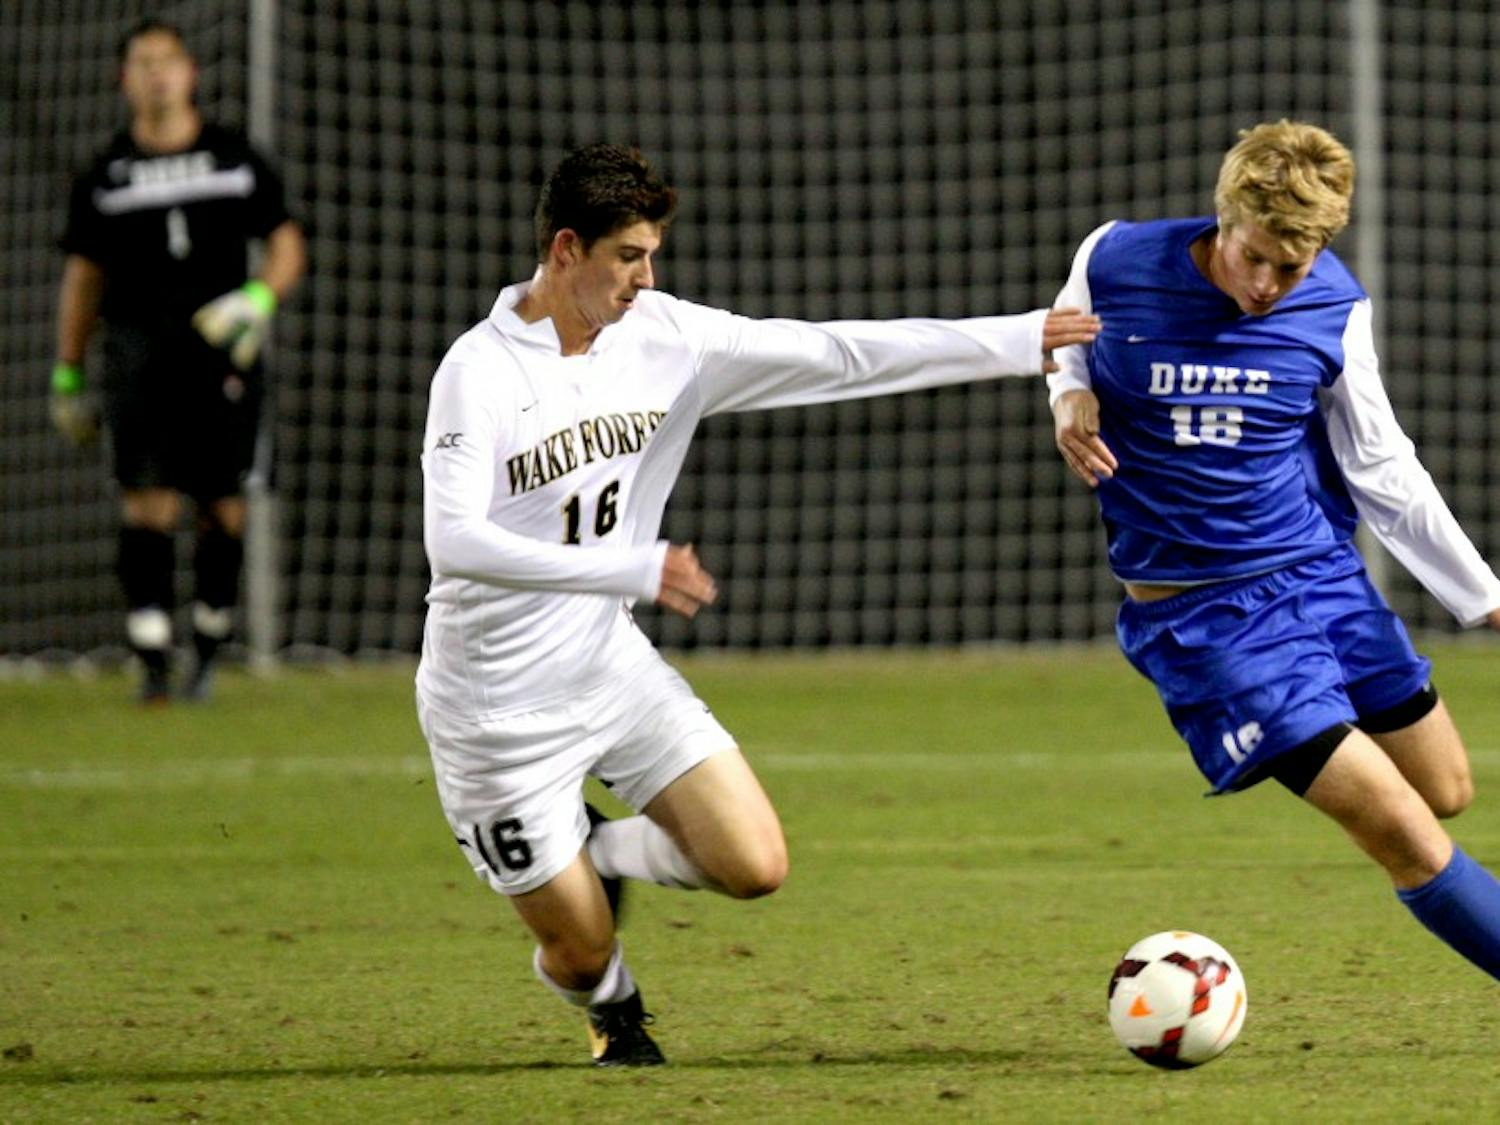 Duke fought back in the closing minutes to salvage a 2-2 draw against Wake Forest last weekend.